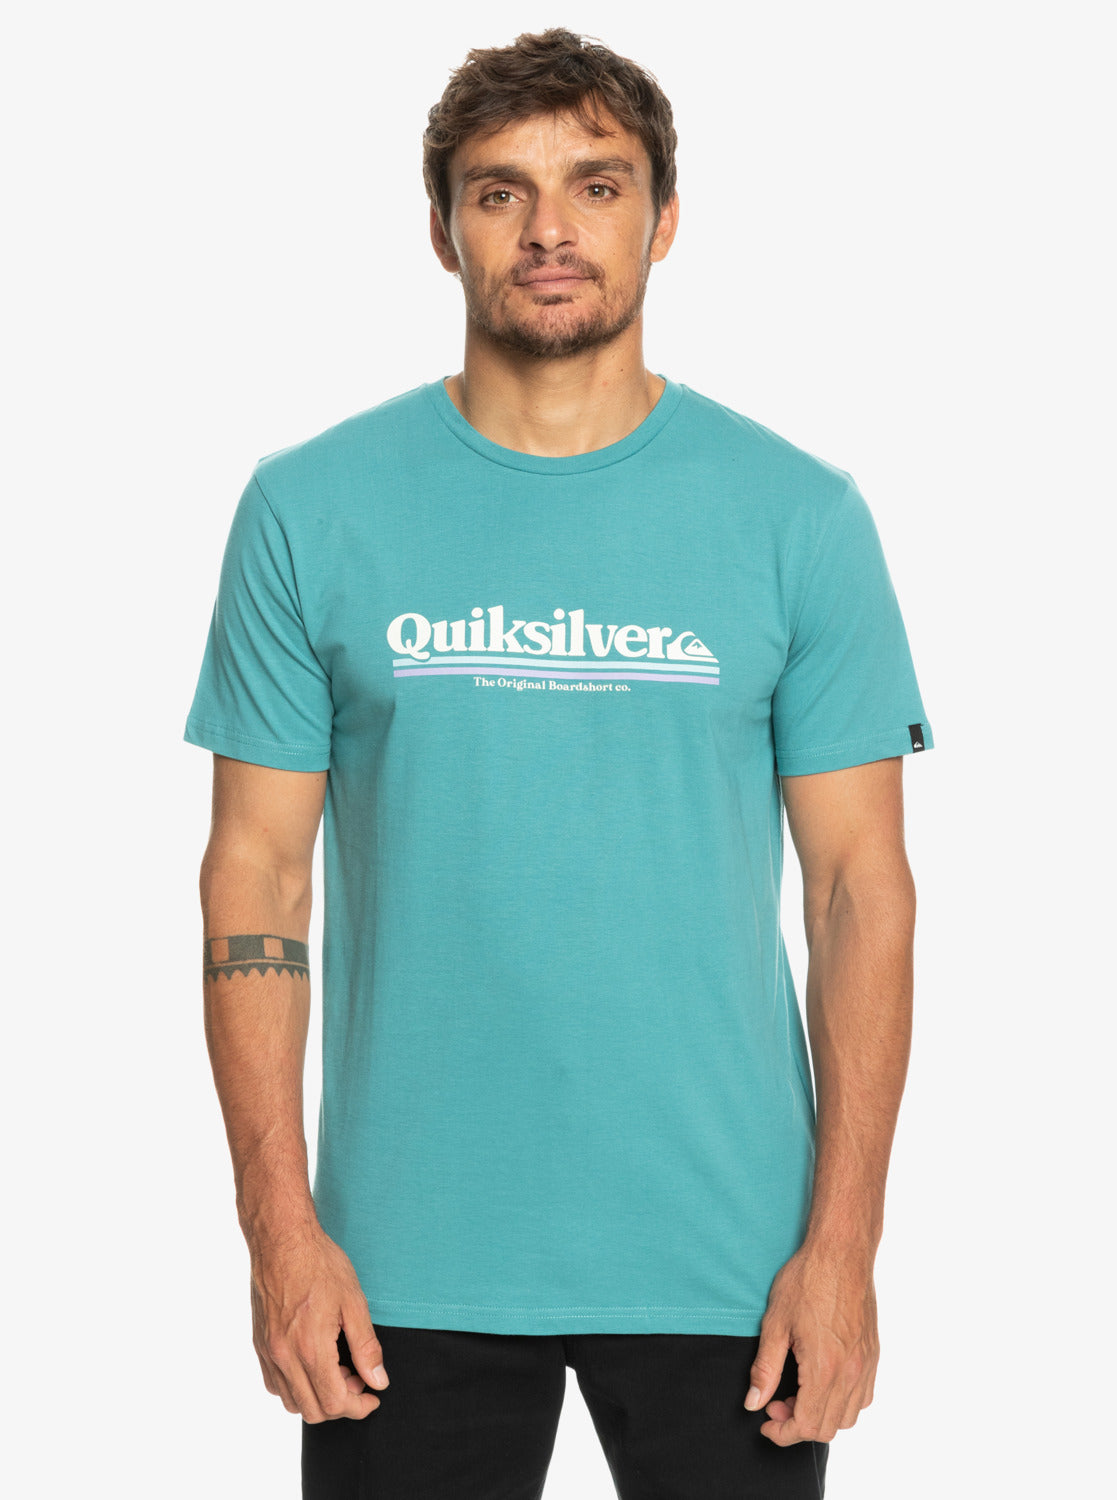 Quiksilver Between The Lines T-Shirt in Brittany Gold